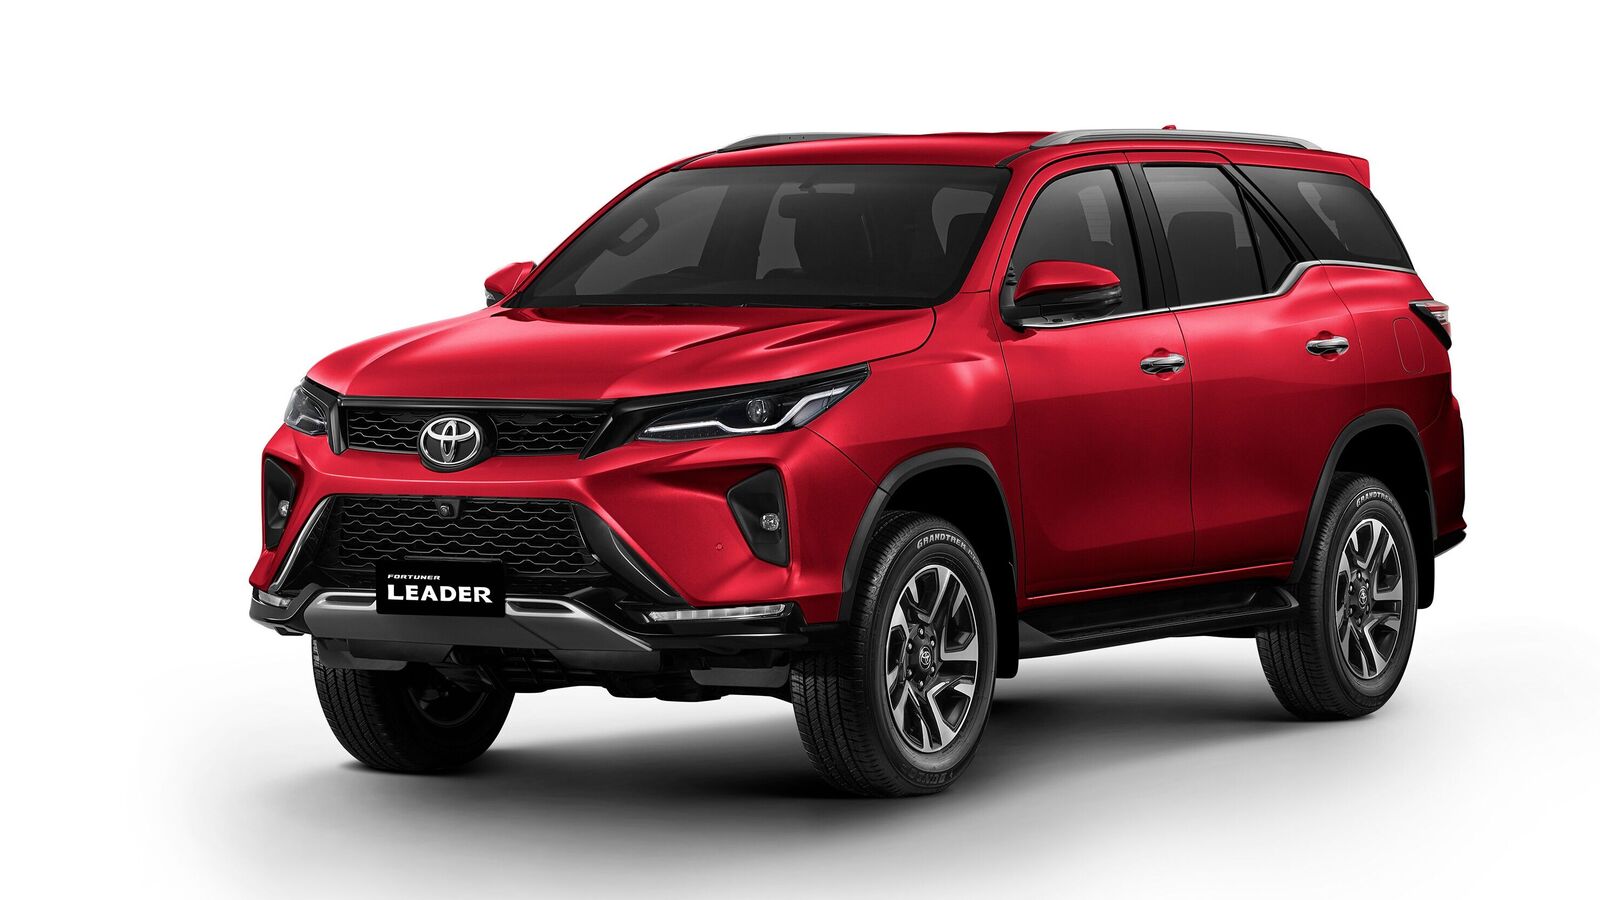 Toyota Fortuner has a new variant, and is the Leader of the pack HT Auto